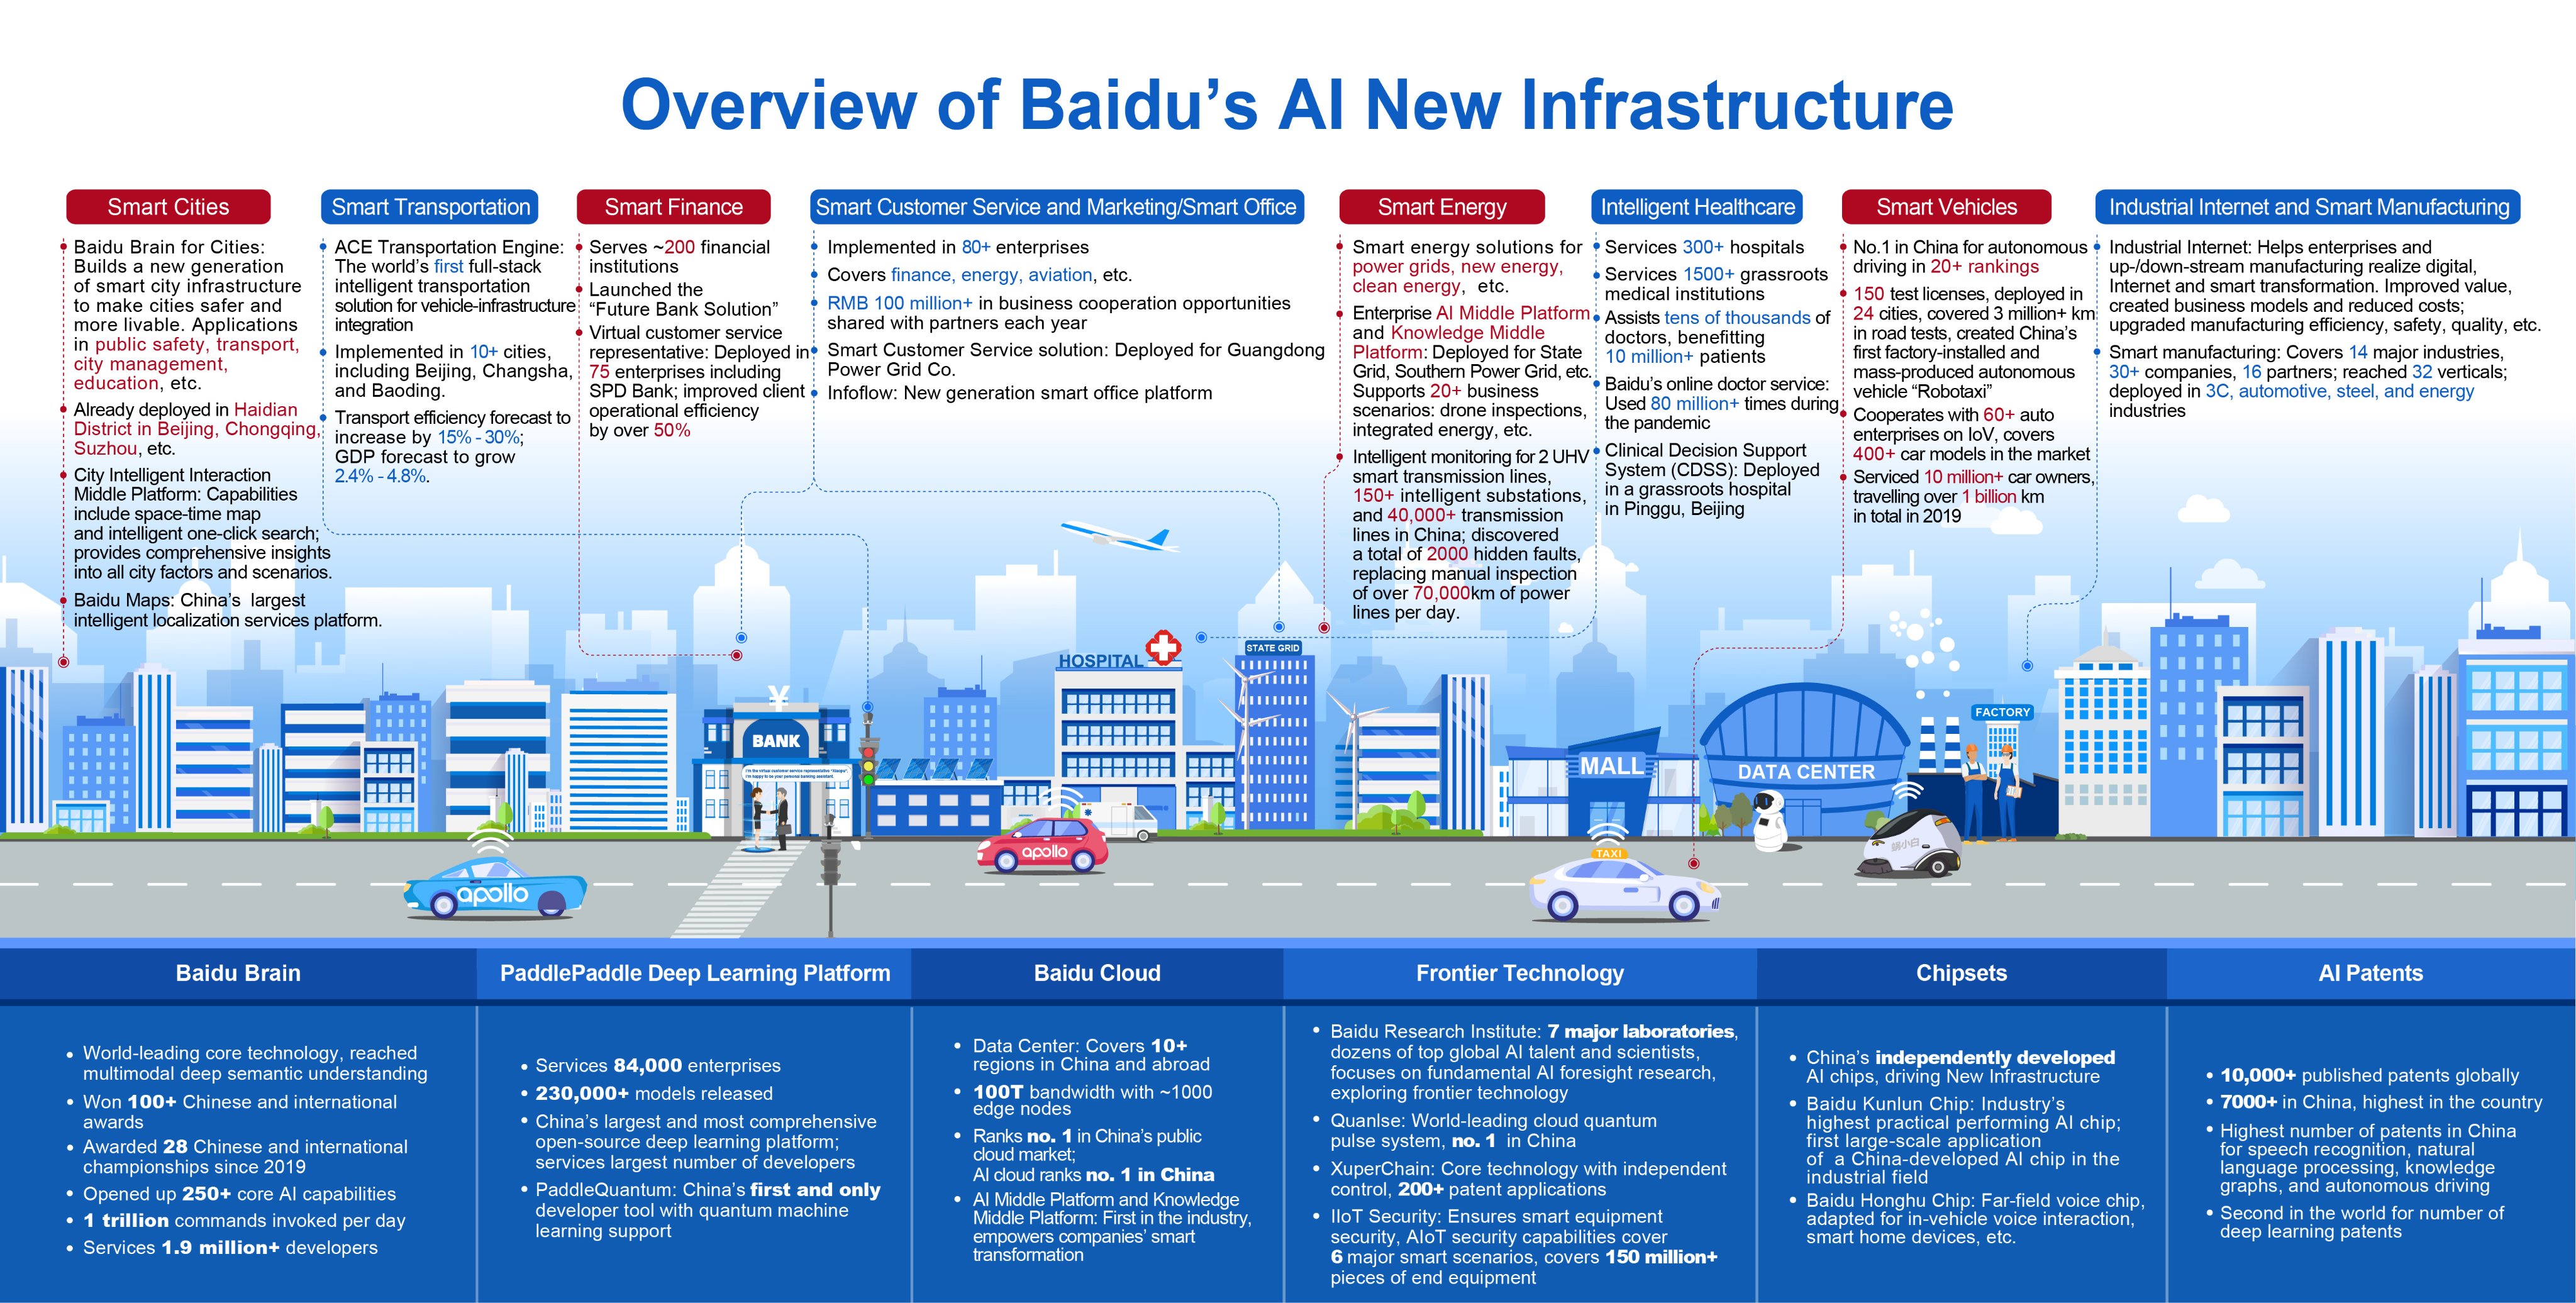 Baidu Inc. on Twitter: "Baidu's AI New Infrastructure Plan will drive development in areas including #AI, chipsets, #cloudcomputing and #datacenters over the decade, and facilitate of so that